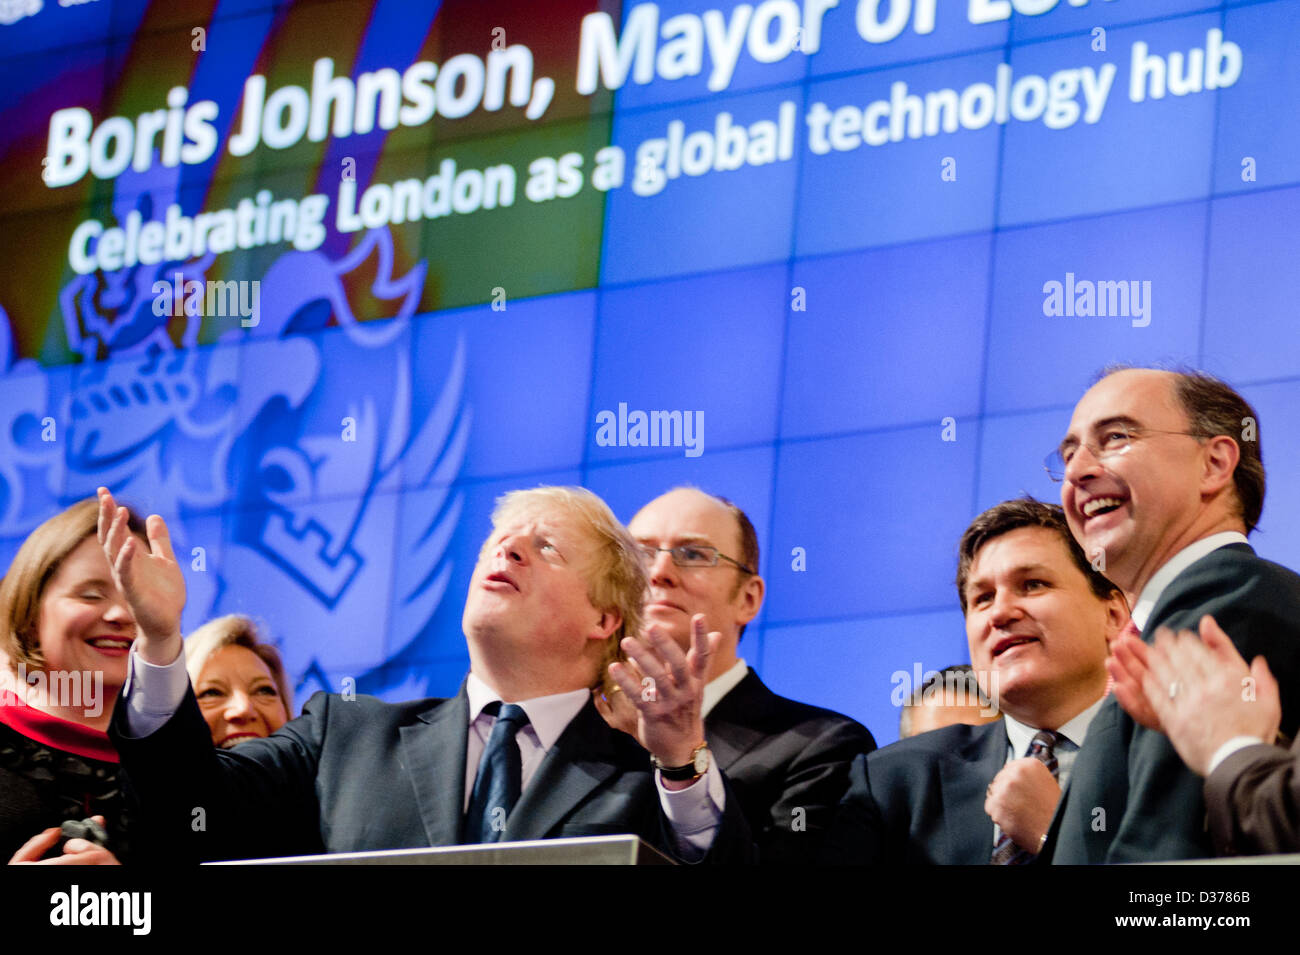 London, UK. 12th February 2013.  The Mayor of London, Boris Johnson joins Xavier Rolet, CEO of London Stock Exchange Group to open the trading day, to encourage more science and technology companies to list in the capital. Credit: pcruciatti / Alamy Live News Stock Photo